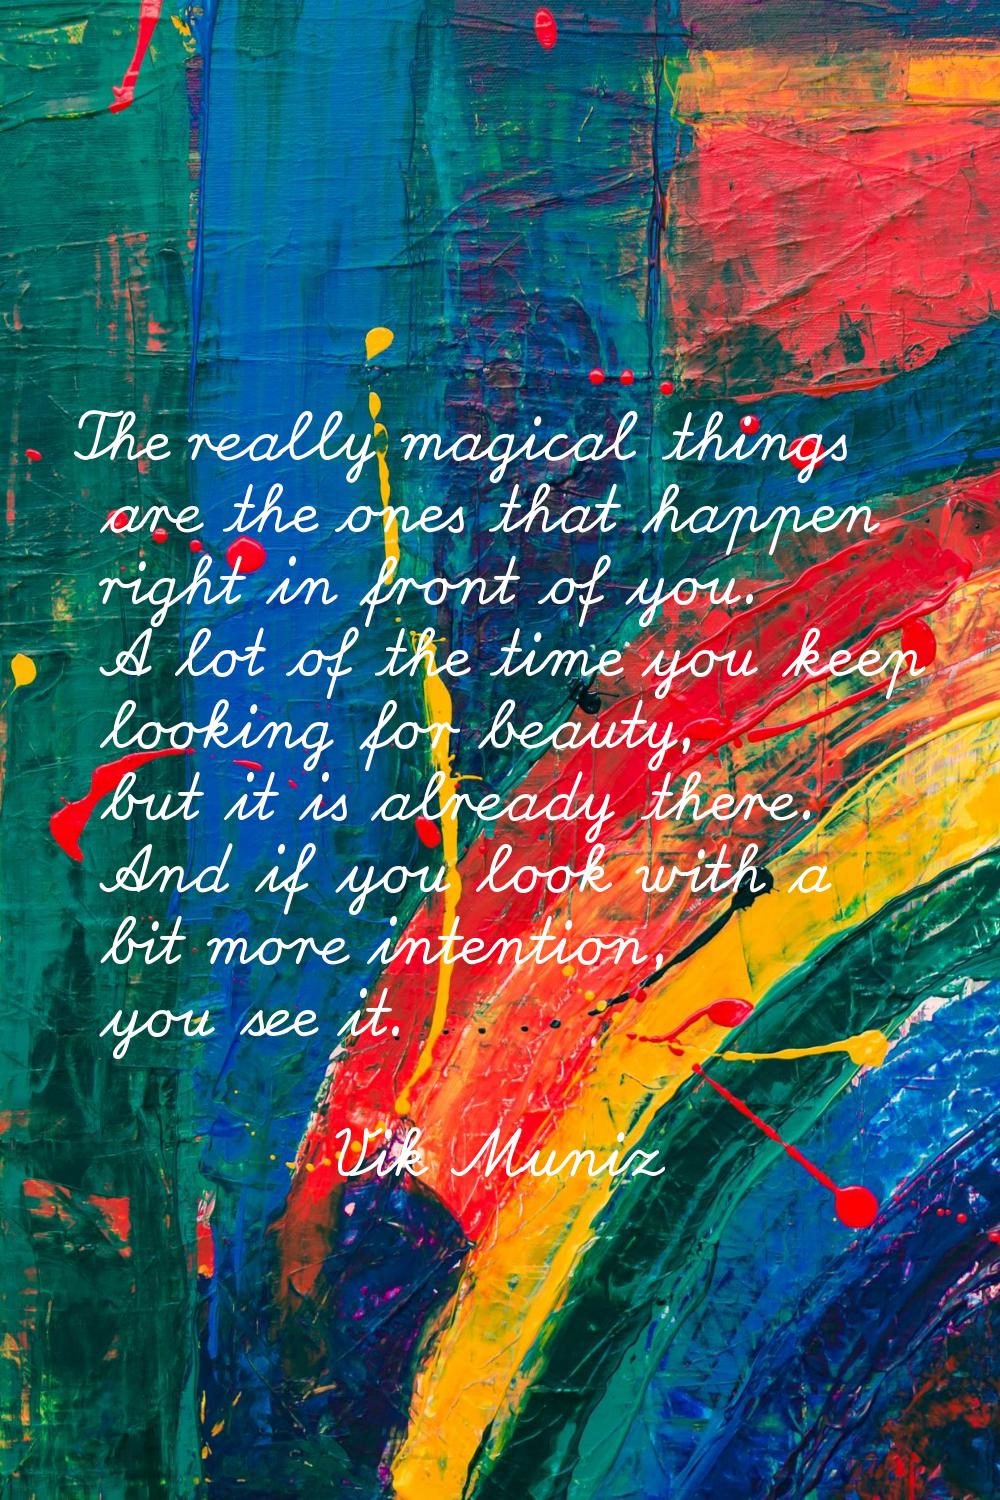 The really magical things are the ones that happen right in front of you. A lot of the time you kee